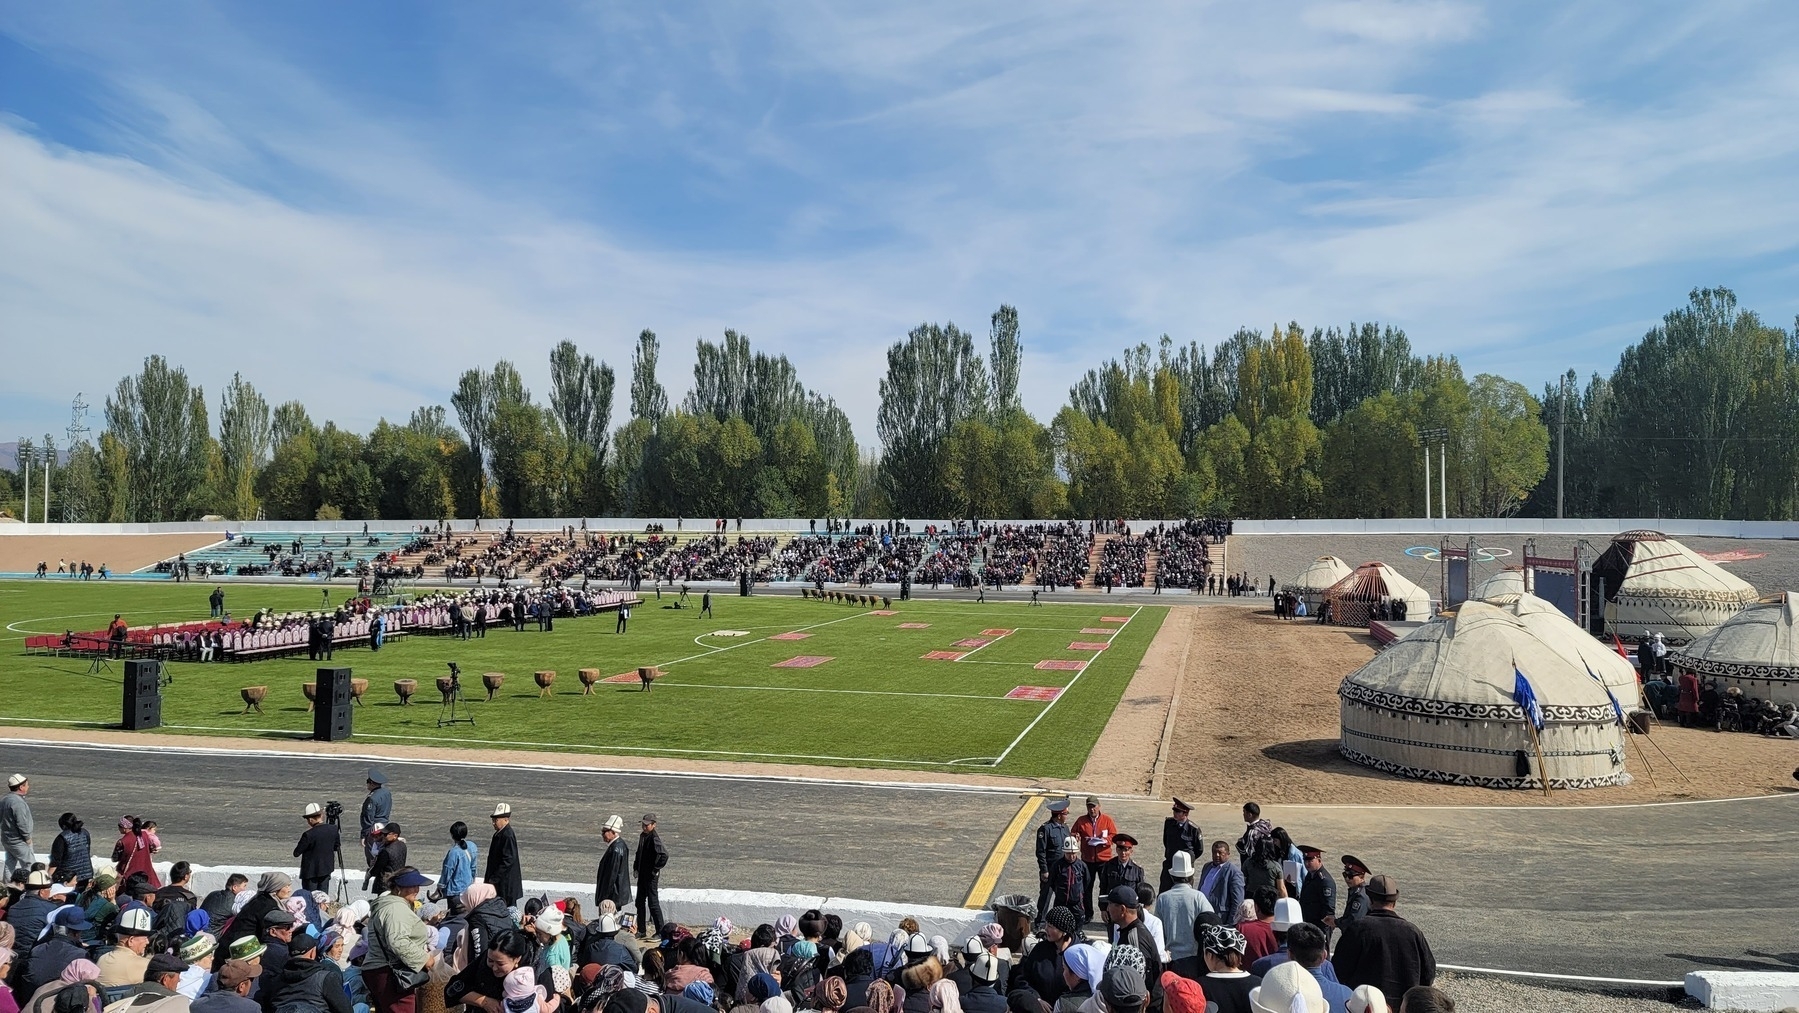 looking down onto a football field in a stadium with spectators sitting on bleacher benches and in chairs on the field pointed toward one of the ends of the field, where about 7 yurts are set up